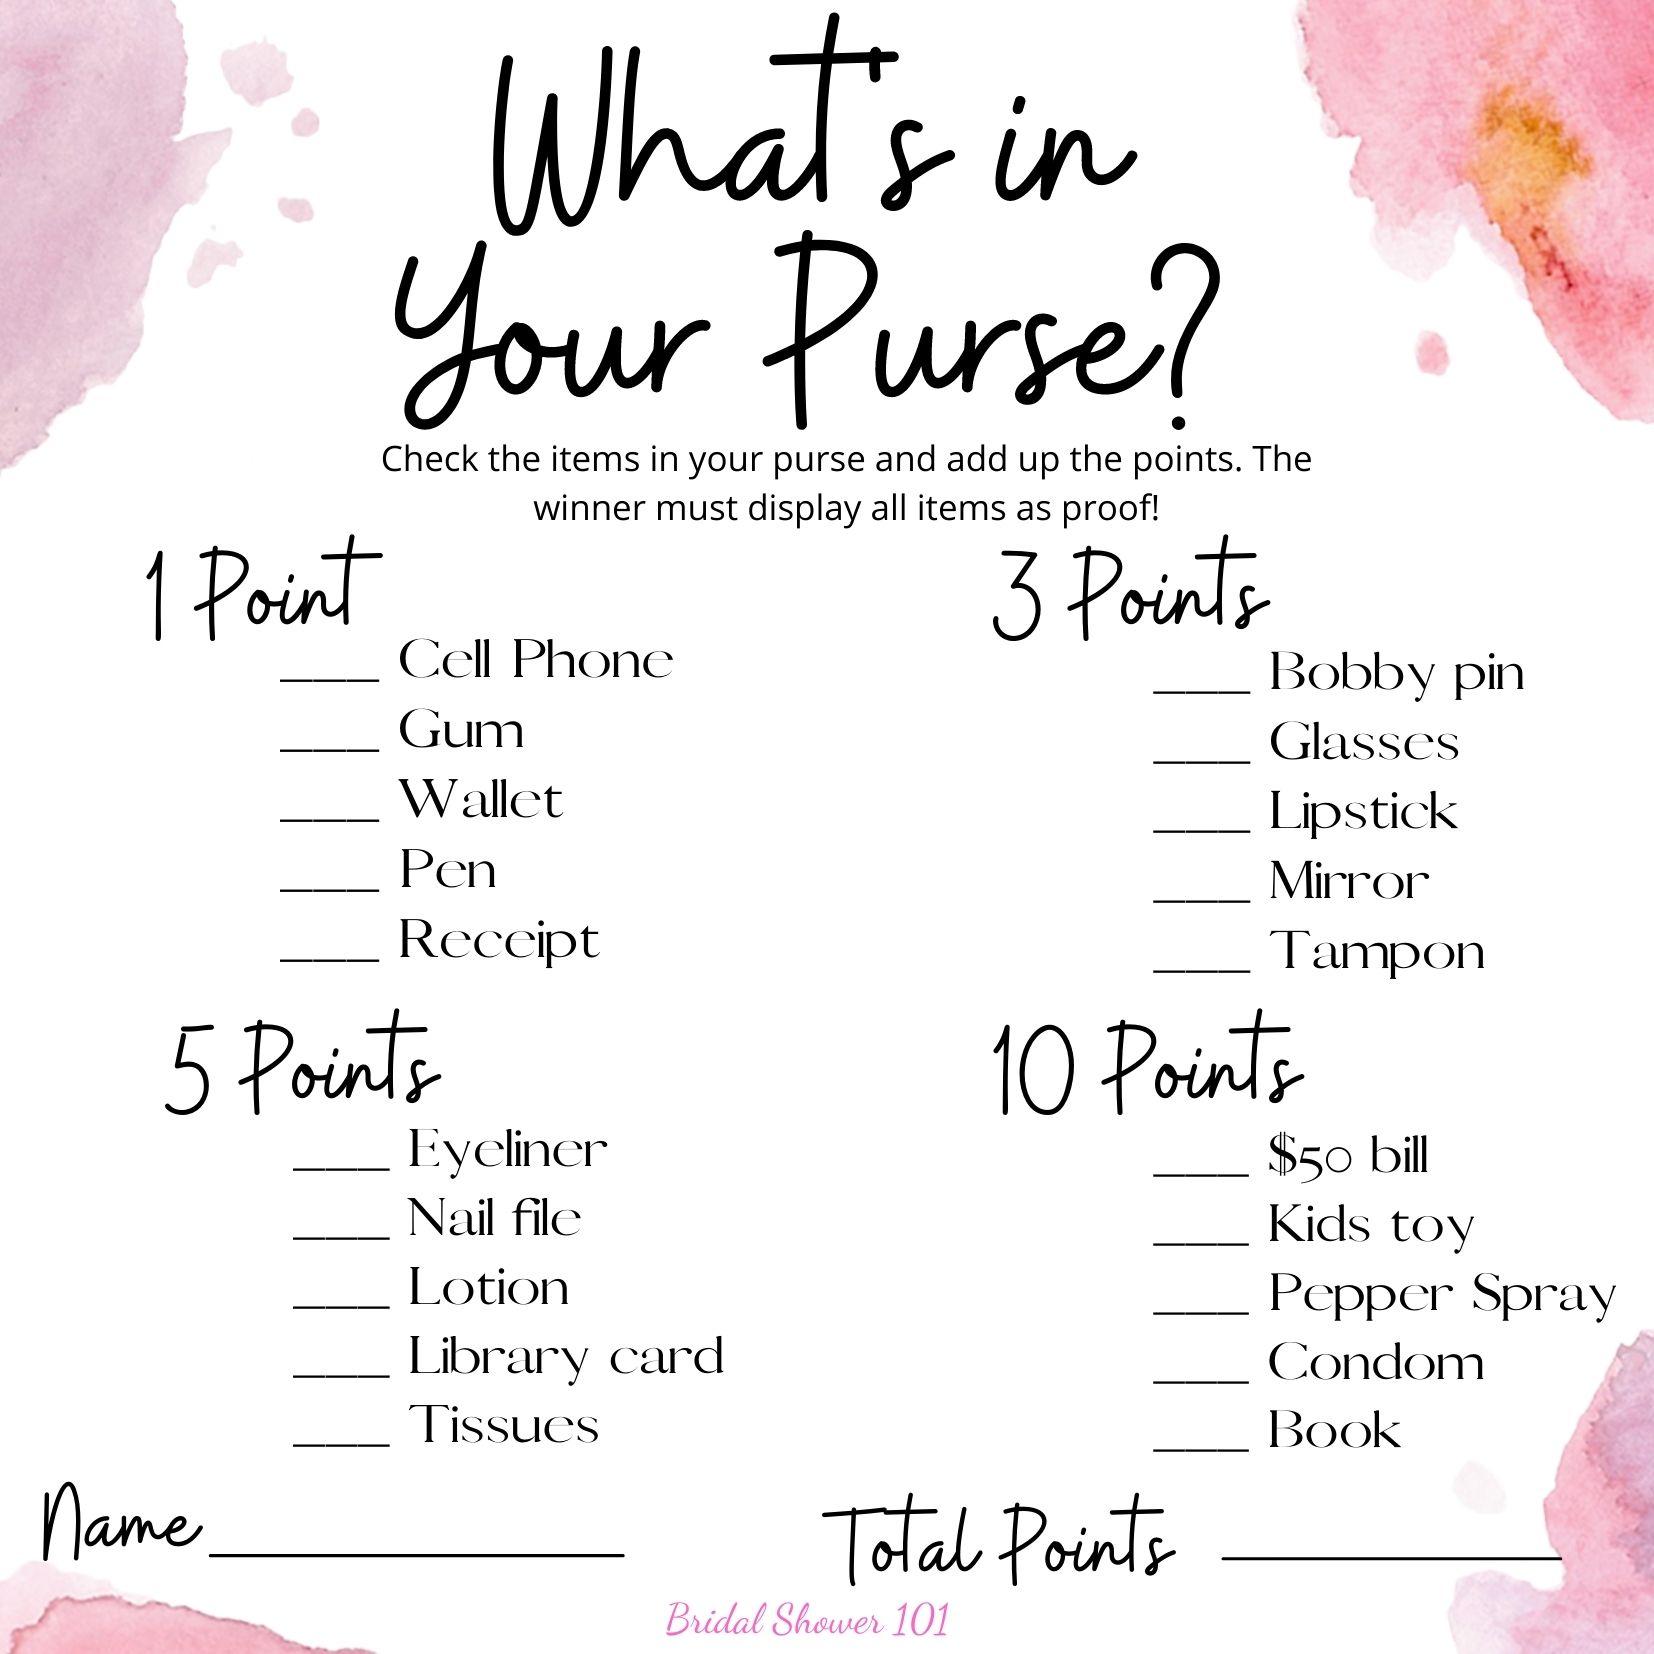 Free Printable What S In Your Purse Game For Bridal Shower Bridal Shower 101